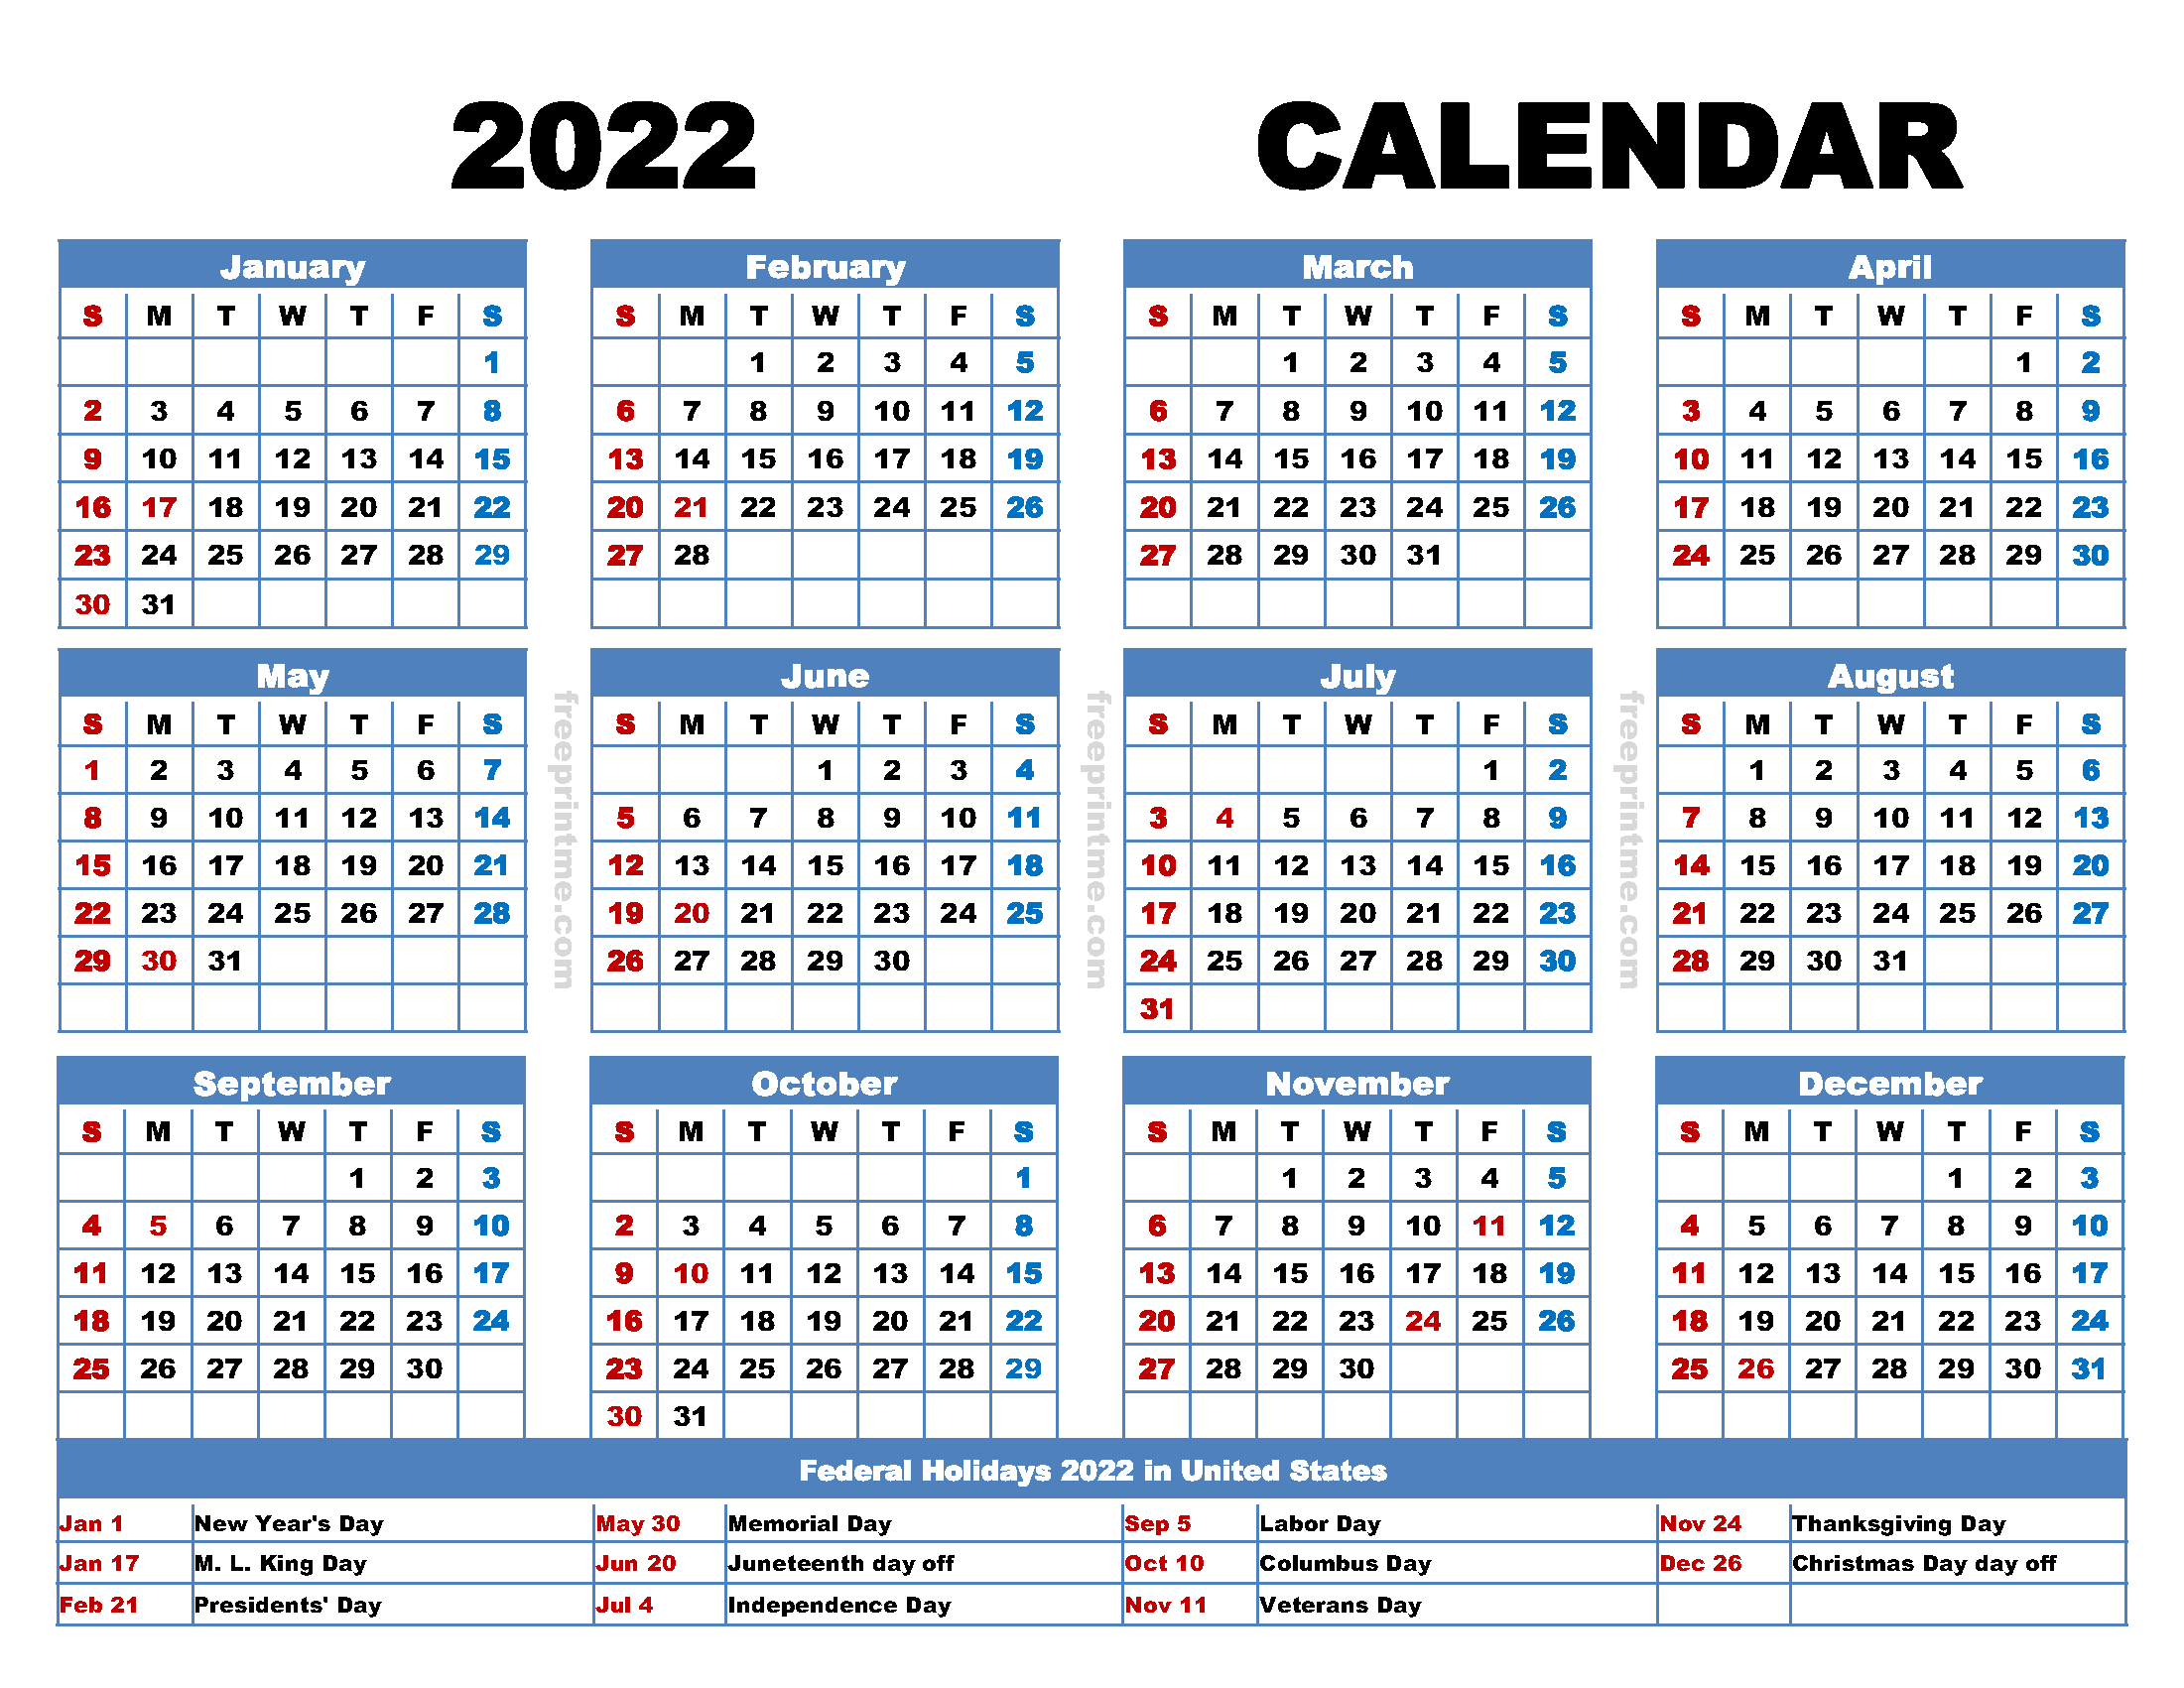 Free Printable 2022 Calendar with Holidays as PDF and PNG Image